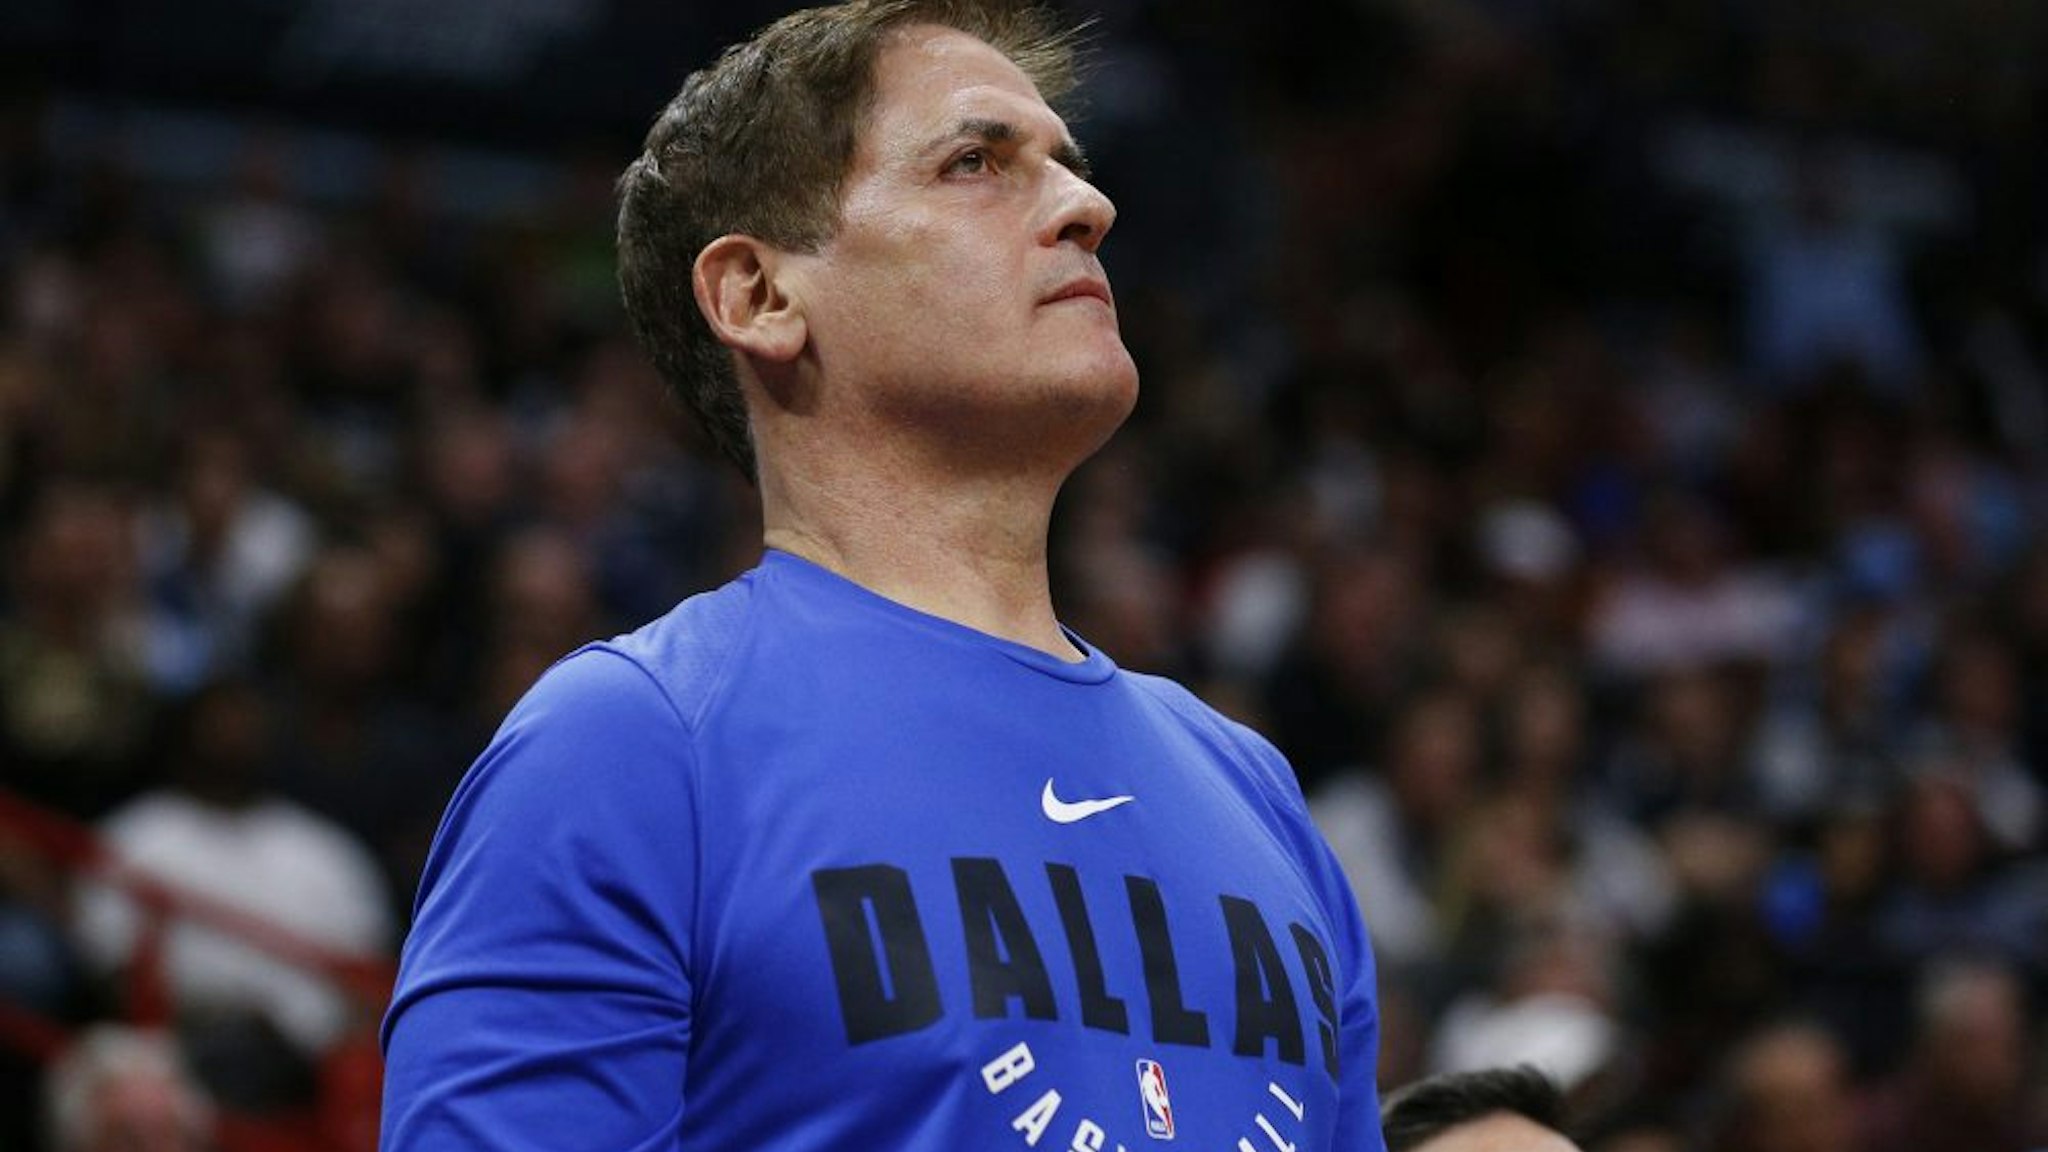 MIAMI, FLORIDA - FEBRUARY 28: Owner Mark Cuban of the Dallas Mavericks reacts against the Miami Heat during the second half at American Airlines Arena on February 28, 2020 in Miami, Florida.